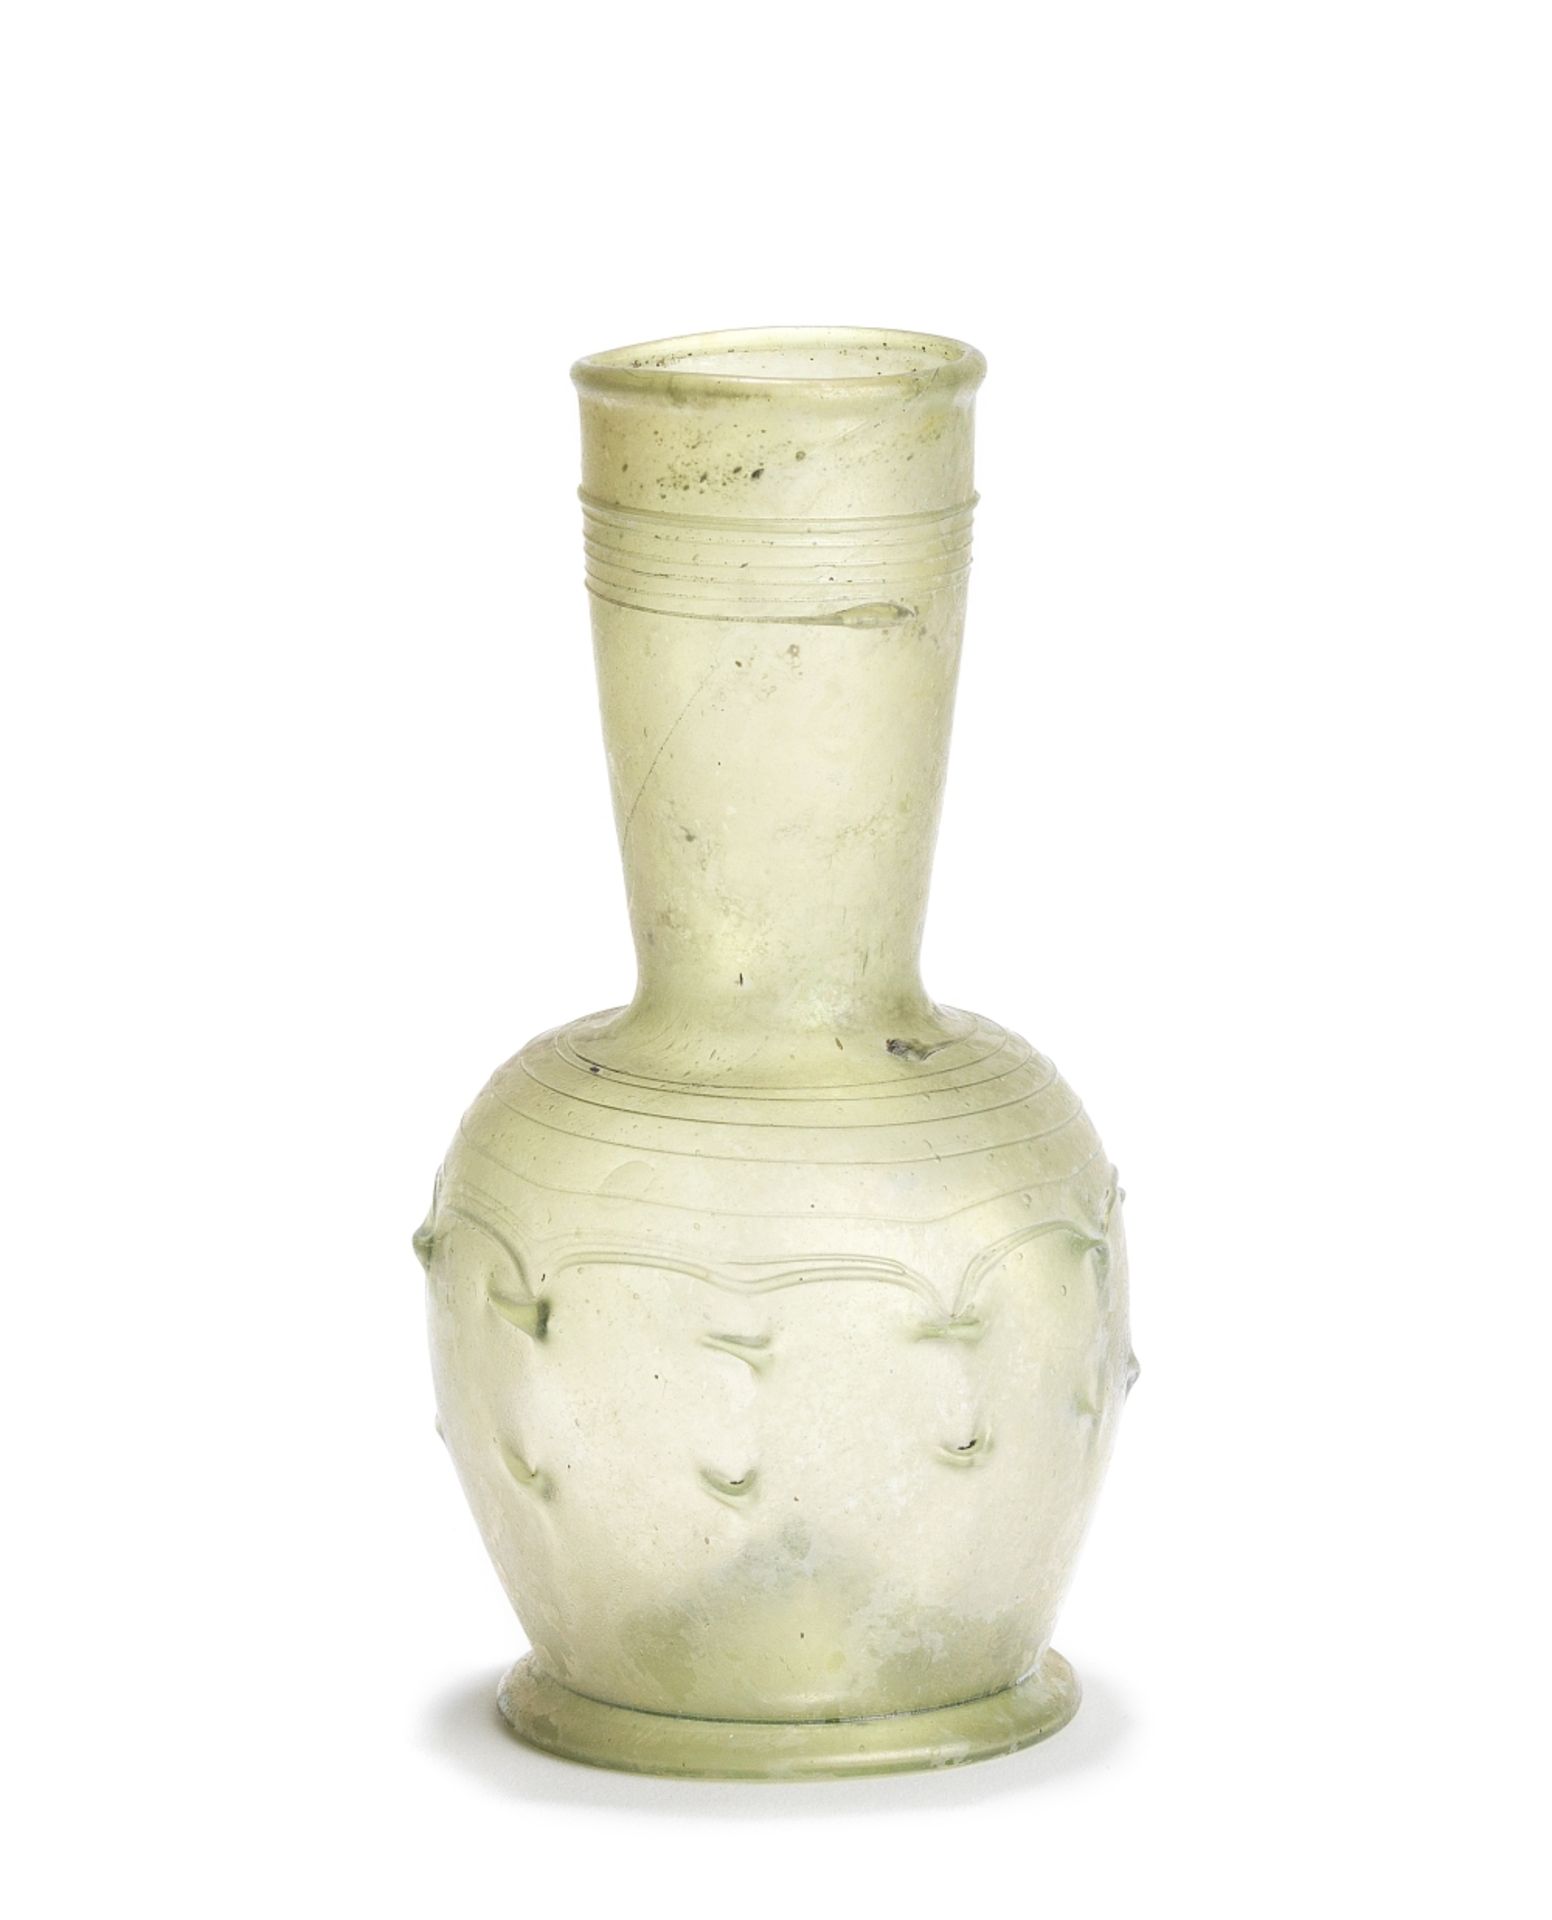 A late Roman - early Byzantine pale olive green glass flask with pincered decoration